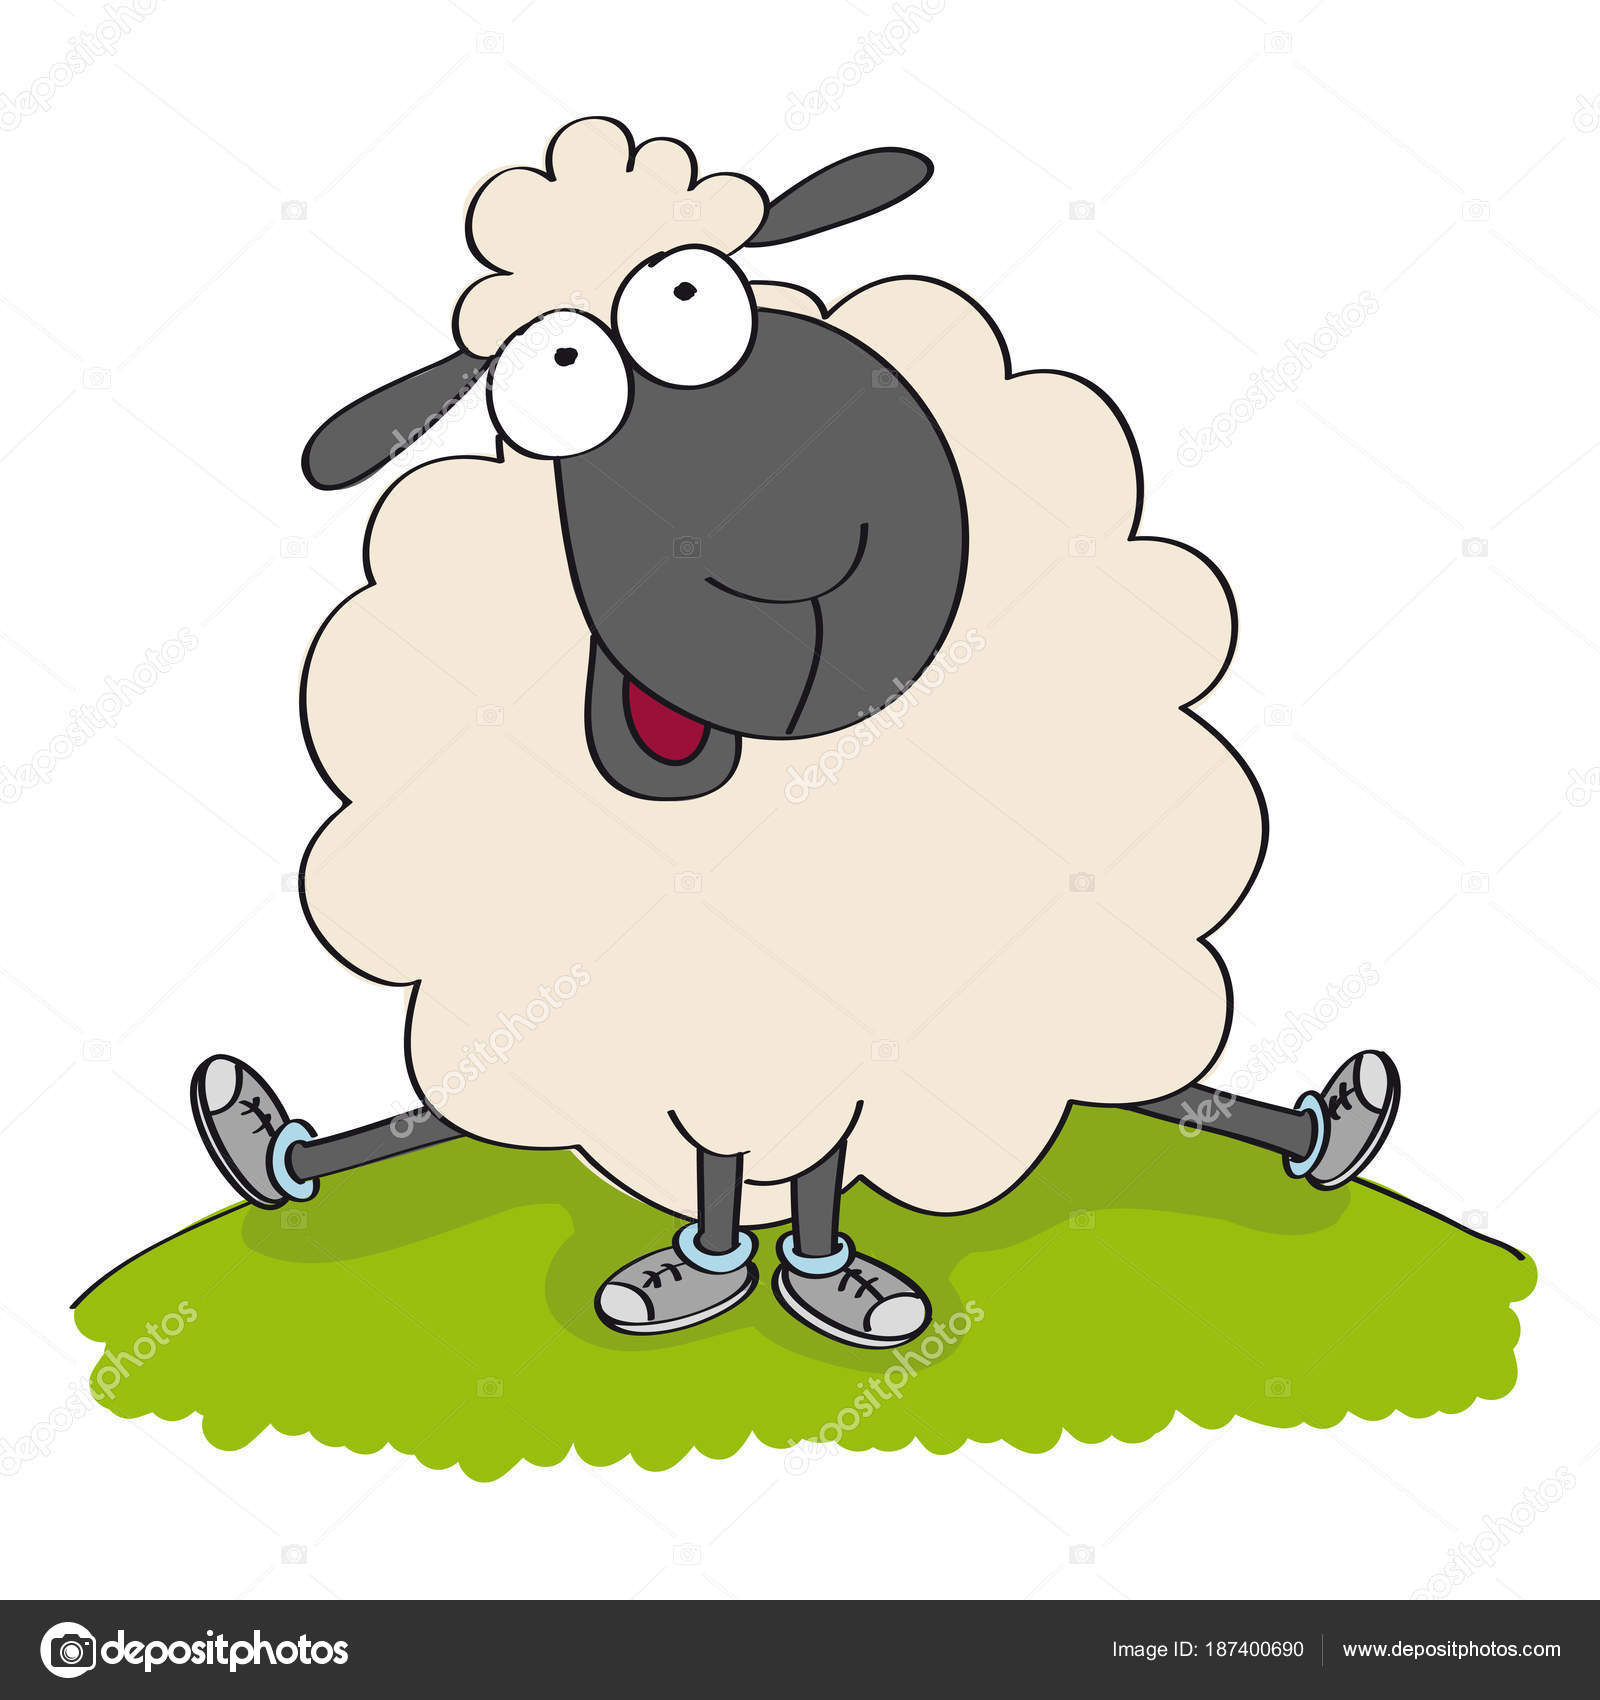 depositphotos stock illustration cute sheep in shoes sitting